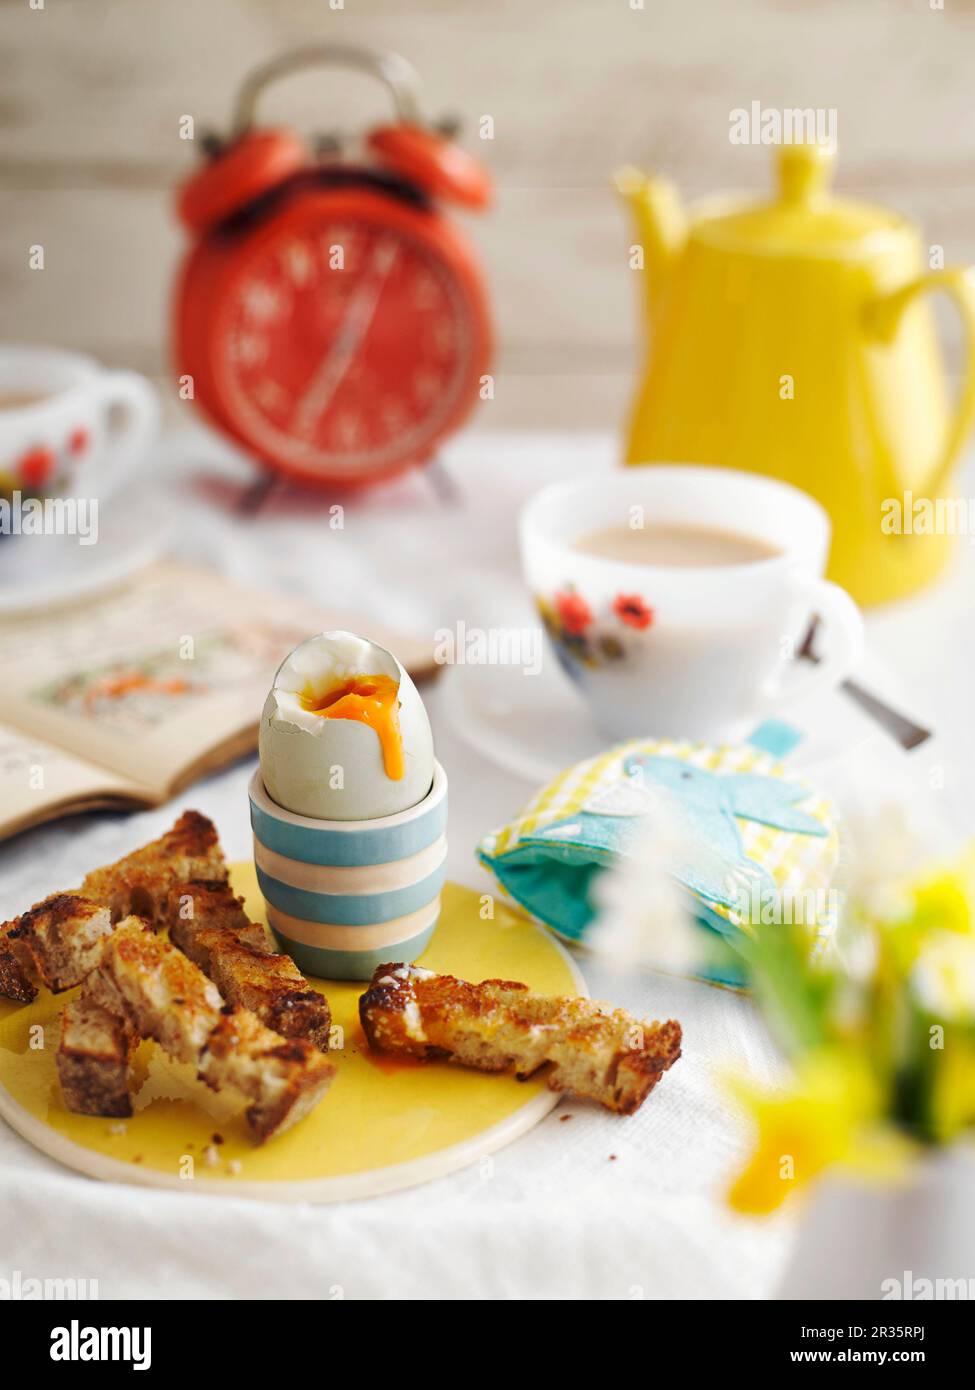 Breakfast with a soft boiled egg and toast soldiers Stock Photo